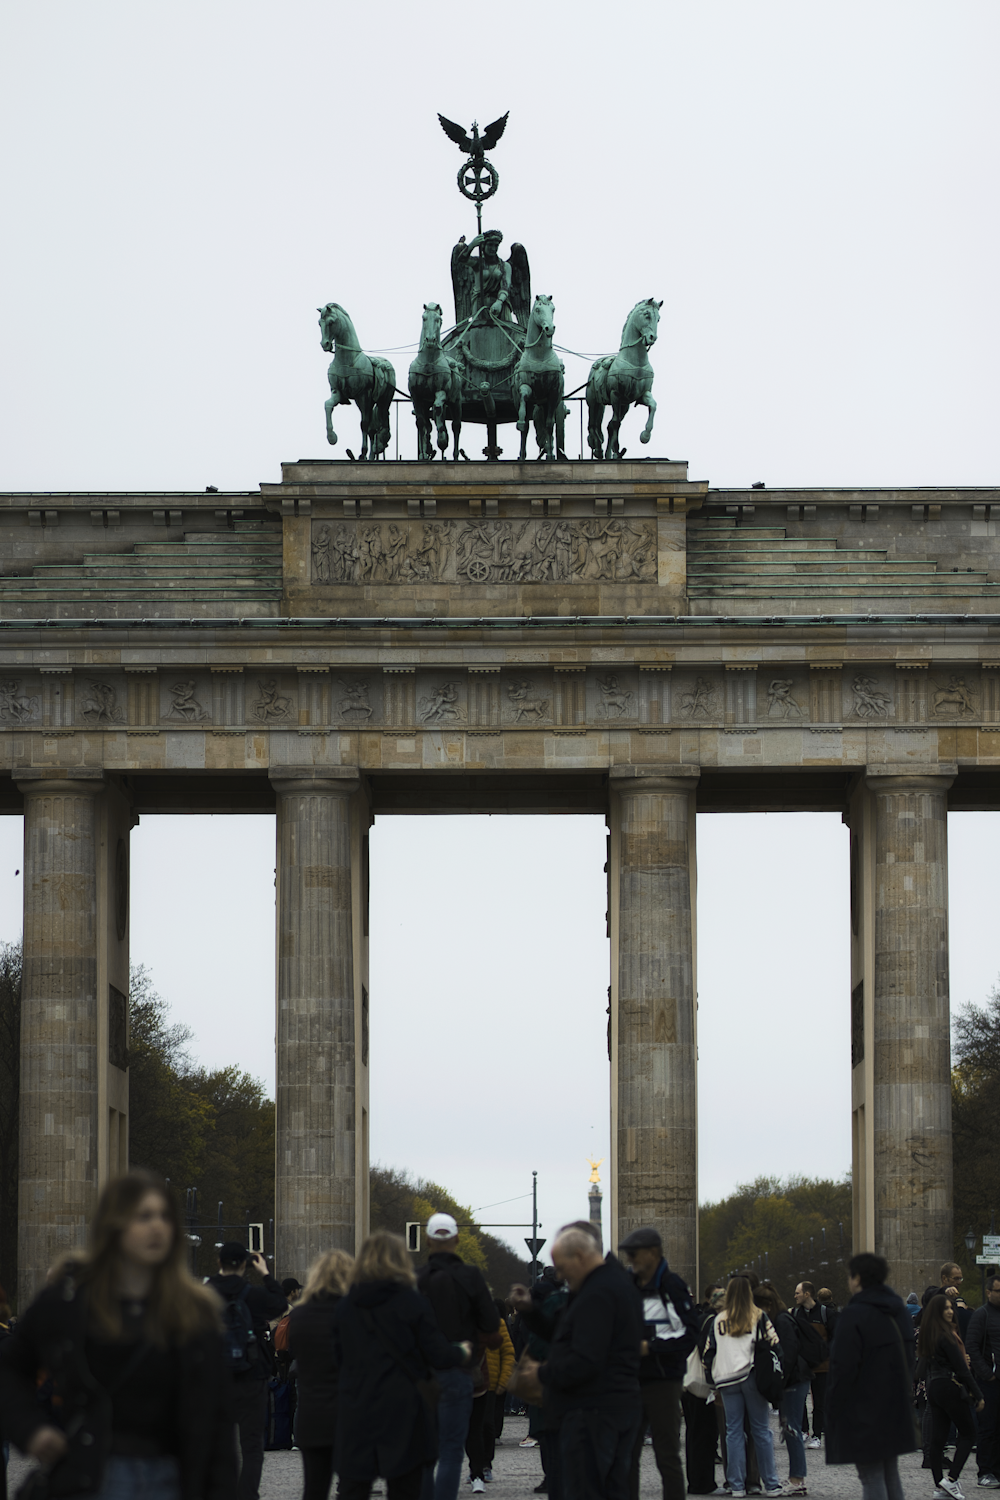 a group of people standing in front of a monument with horses on top with Brandenburg Gate in the background